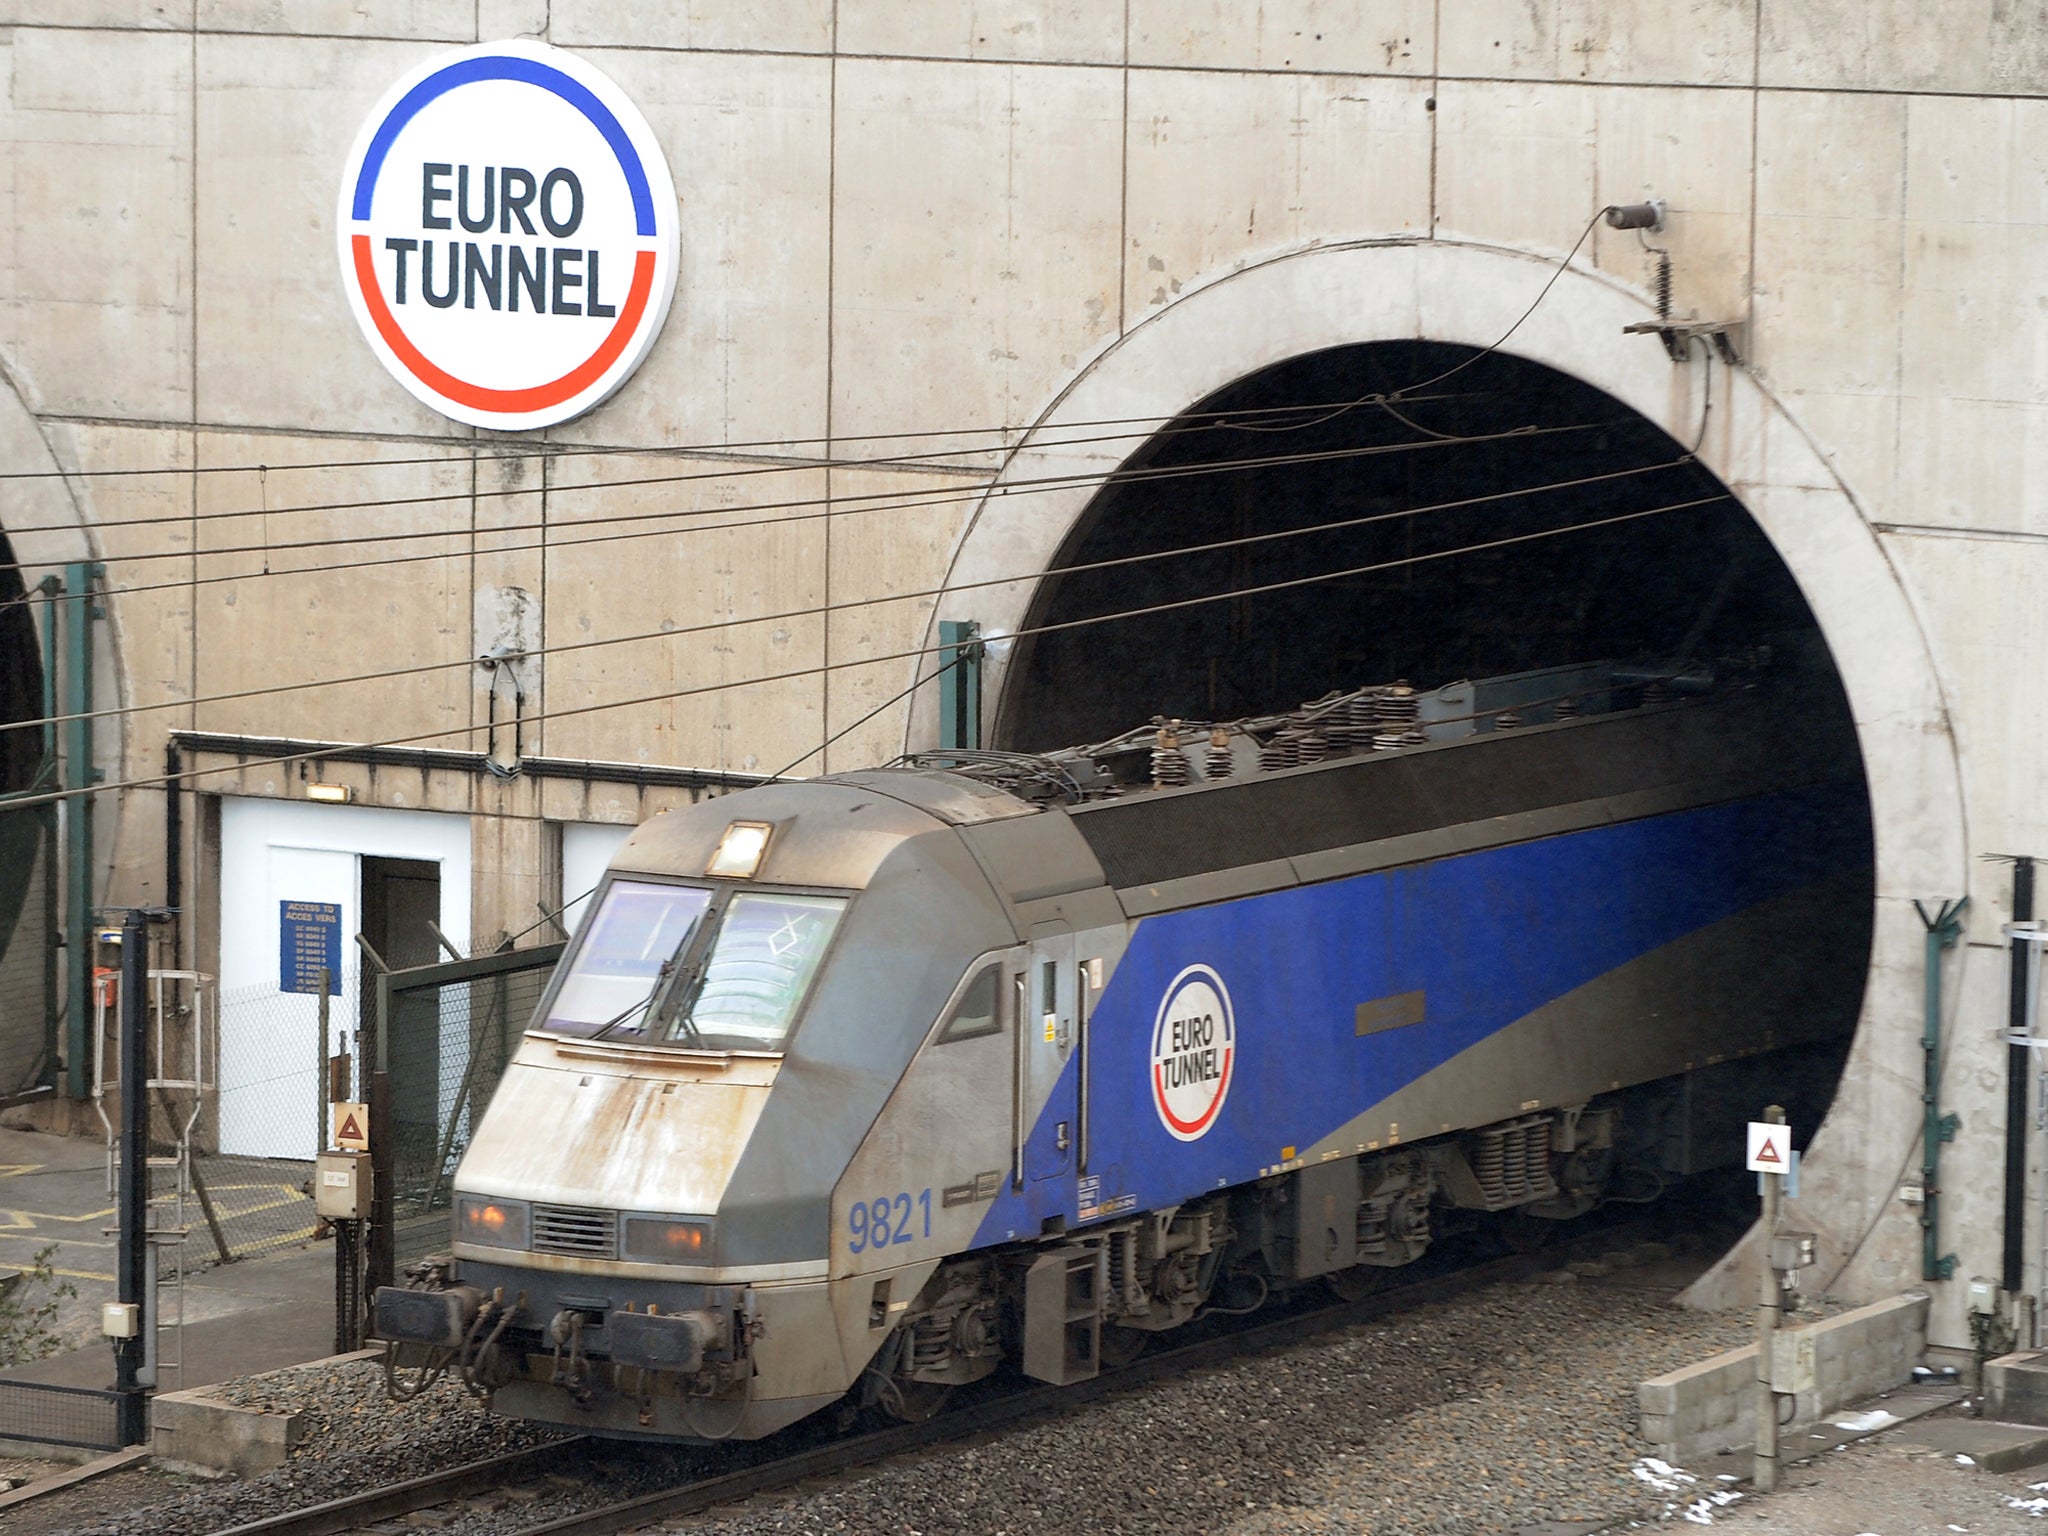 The Channel Tunnel connects Folkestone and Calais